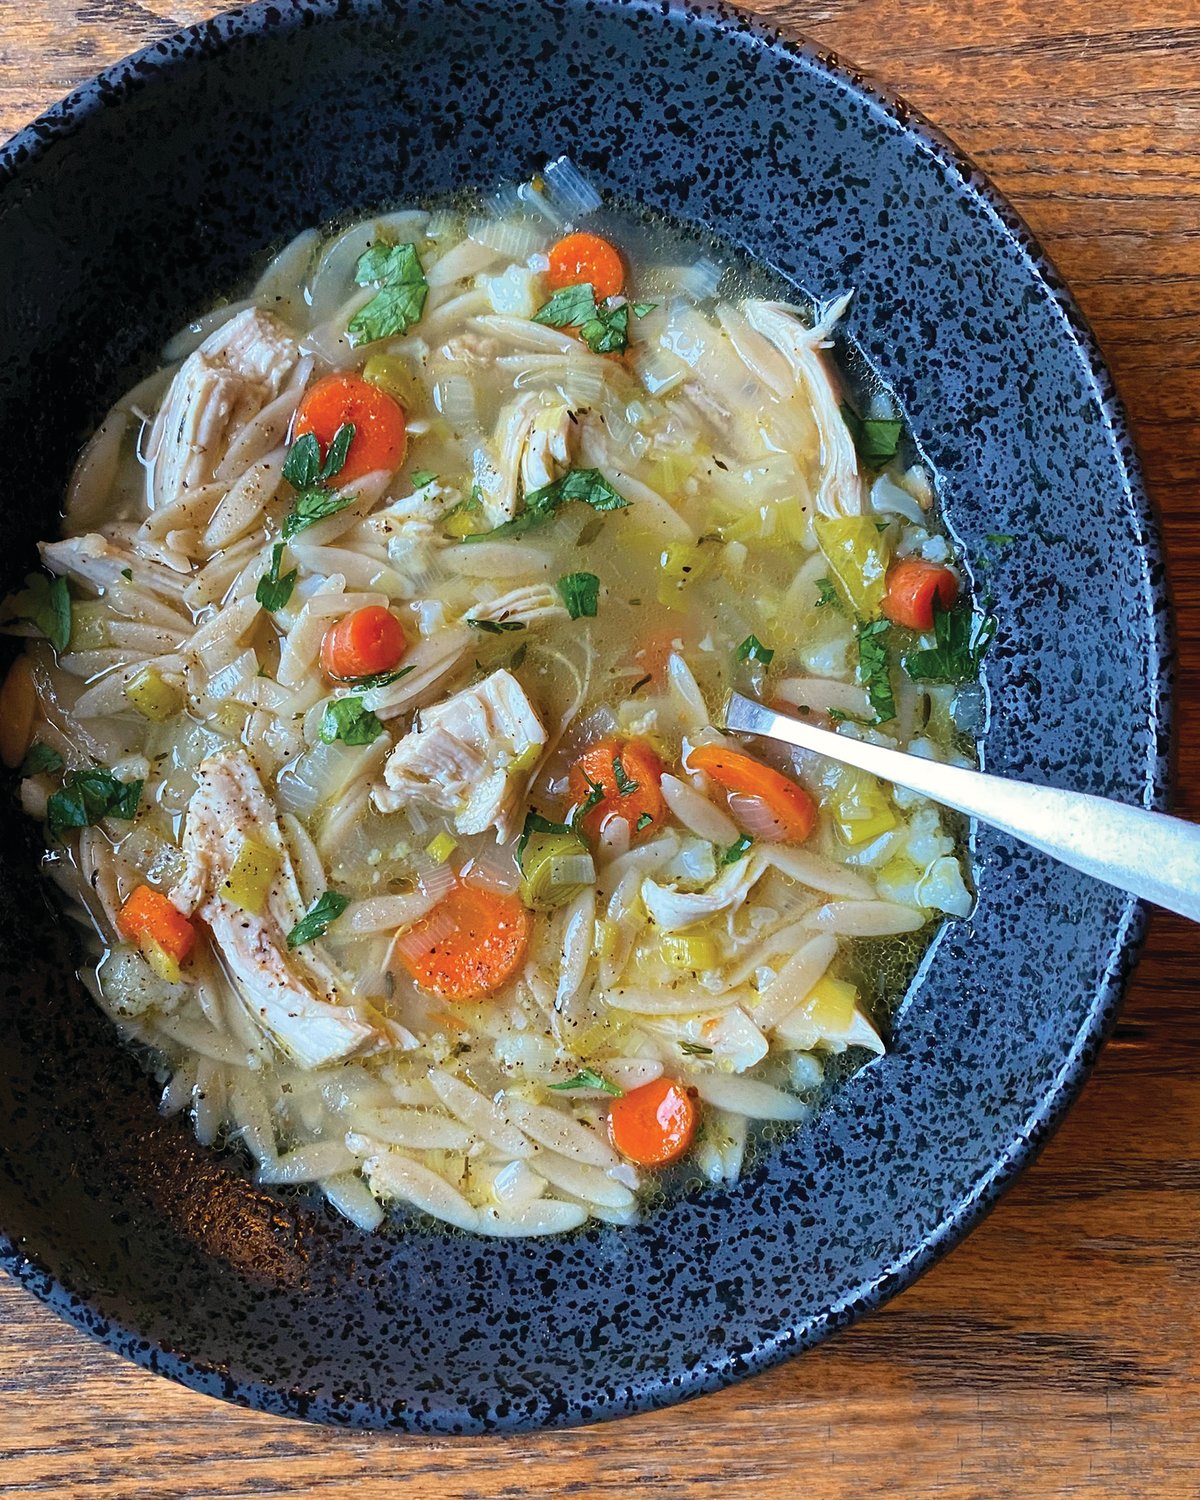 The key ingredient in this simple and delicious soup is orzo. Orzo is the Italian word for barley.